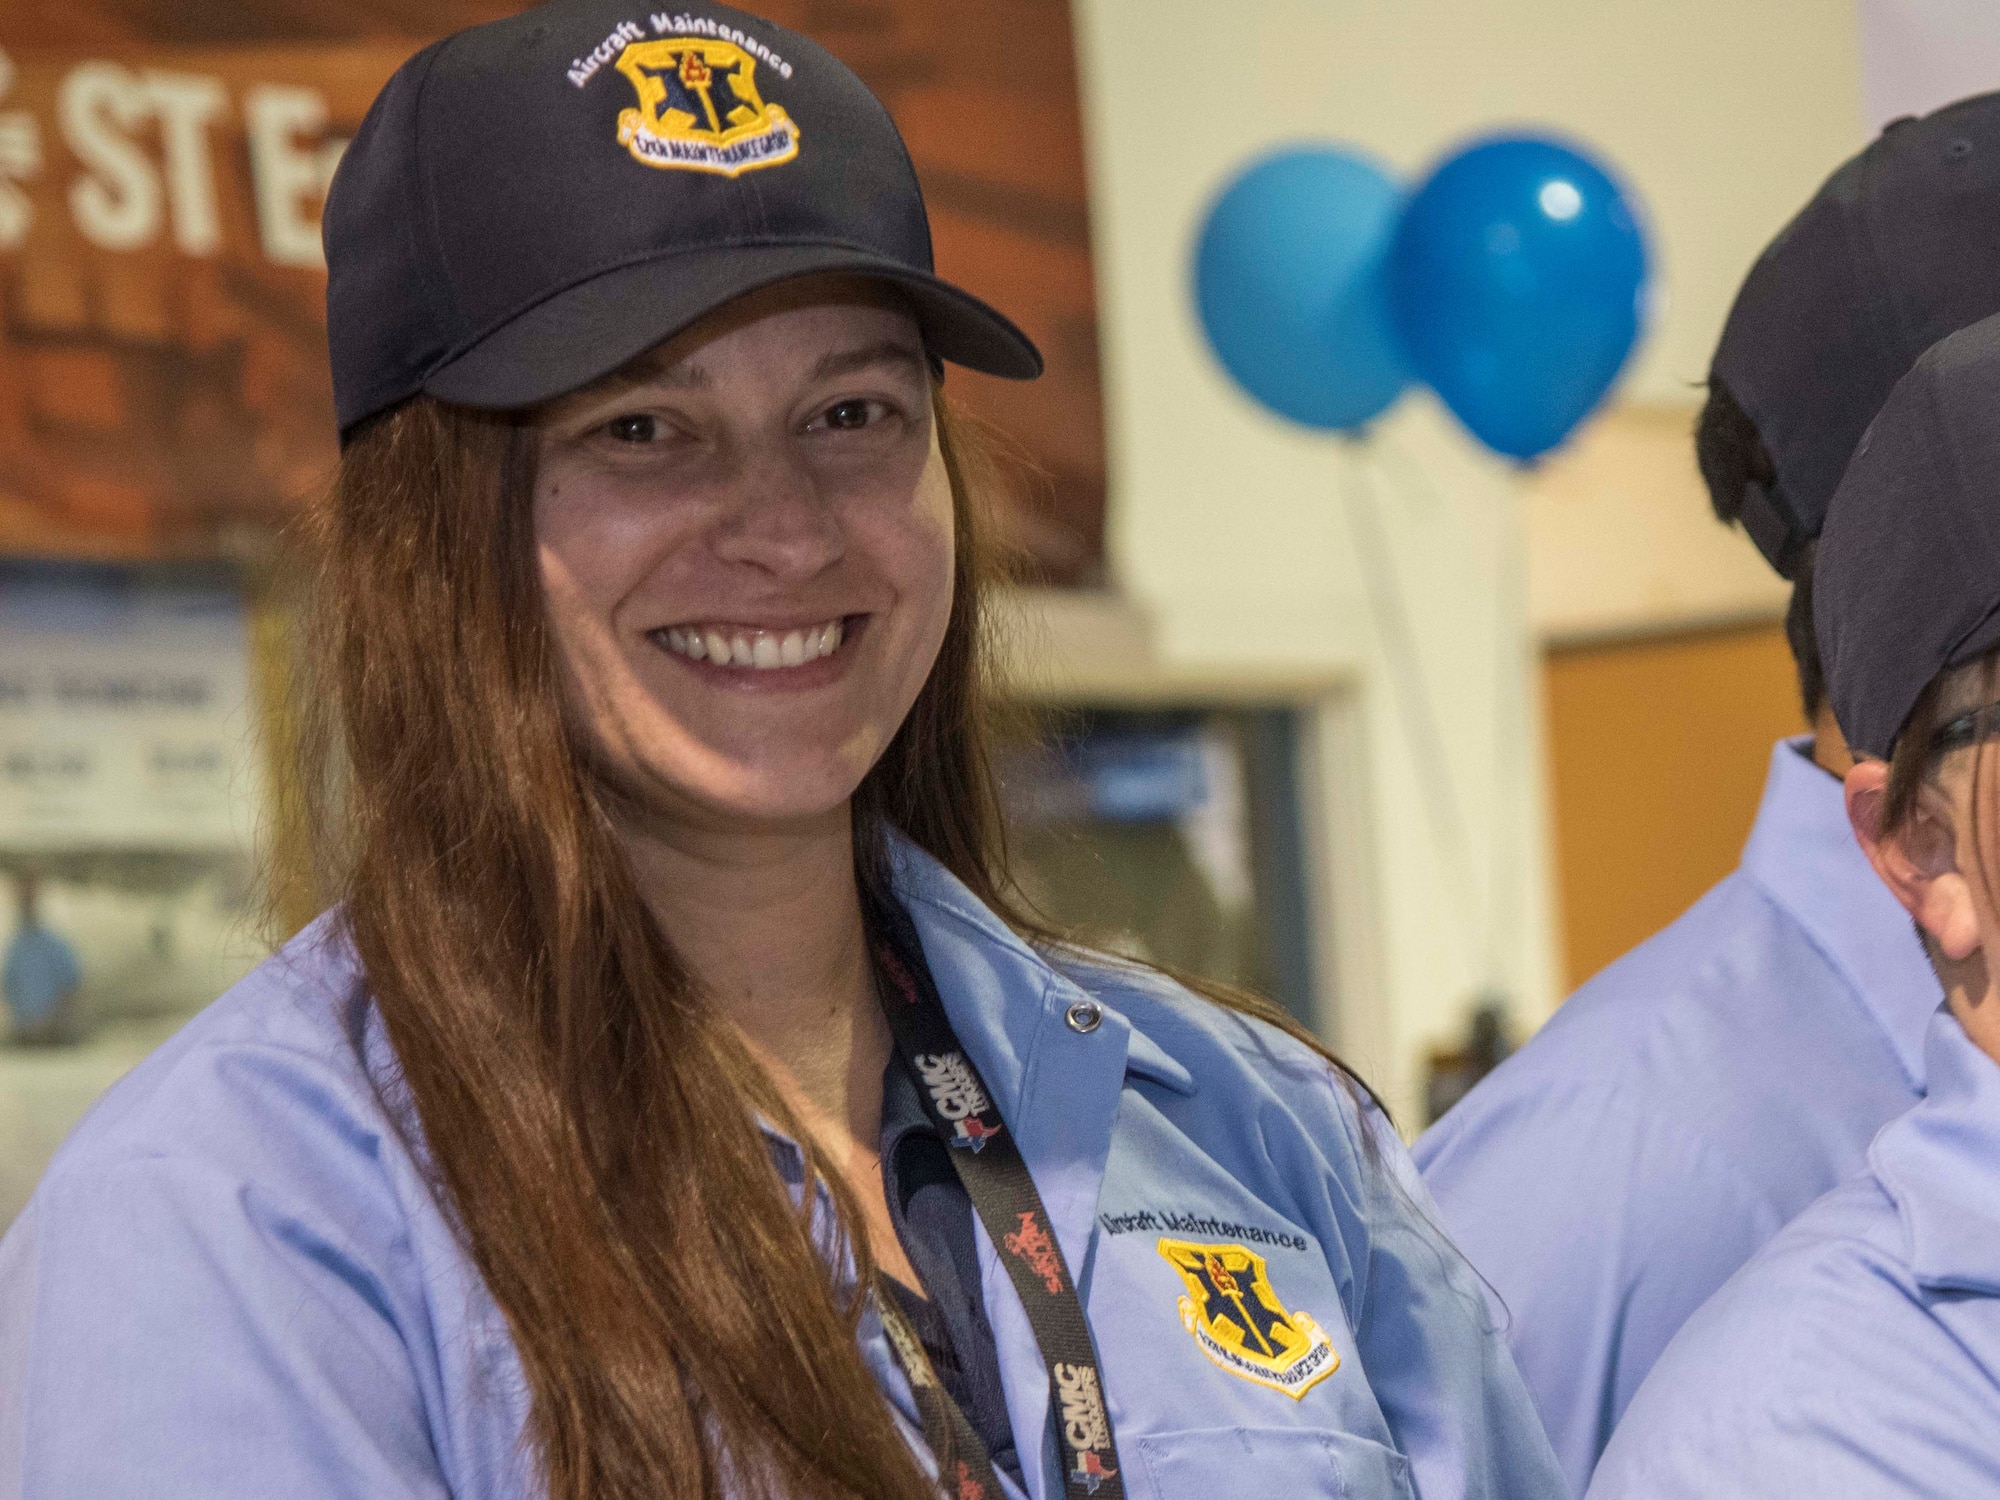 Katherine Longest, a new hire for the 12th Maintenance Group, Joint Base San Antonio-Randolph, smiles in newly issued 12th MXG apparel during her graduation ceremony Jan. 23, 2020, at the Hallmark University College of Aeronautics, San Antonio. Longest was one of the seven 12th MXG new hires recruited from her graduating class.